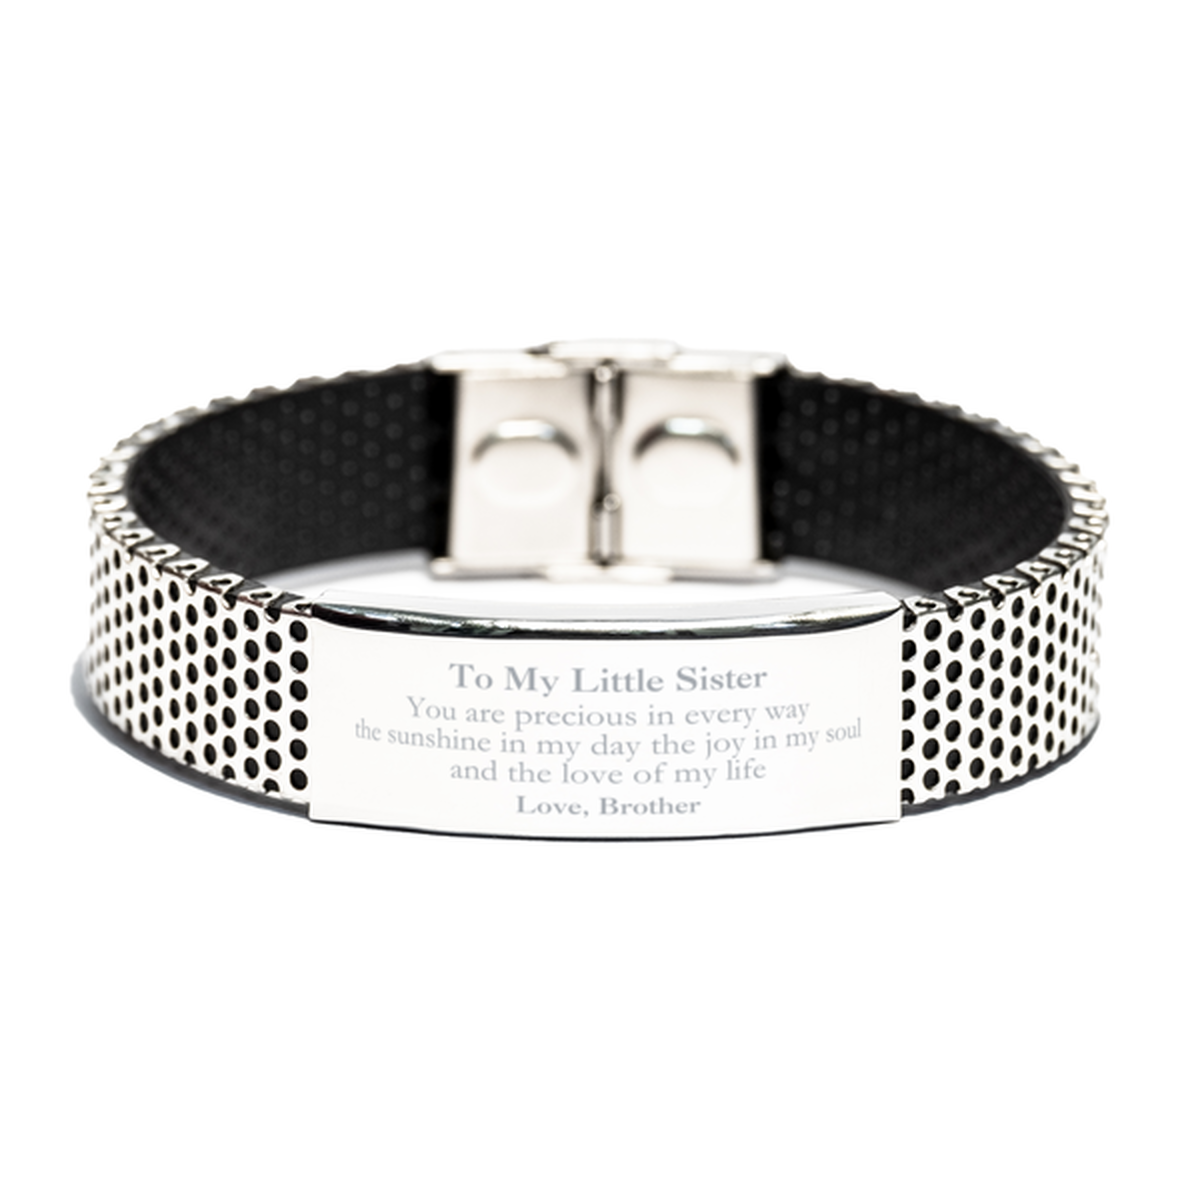 Graduation Gifts for Little Sister Stainless Steel Bracelet Present from Brother, Christmas Little Sister Birthday Gifts Little Sister You are precious in every way the sunshine in my day. Love, Brother